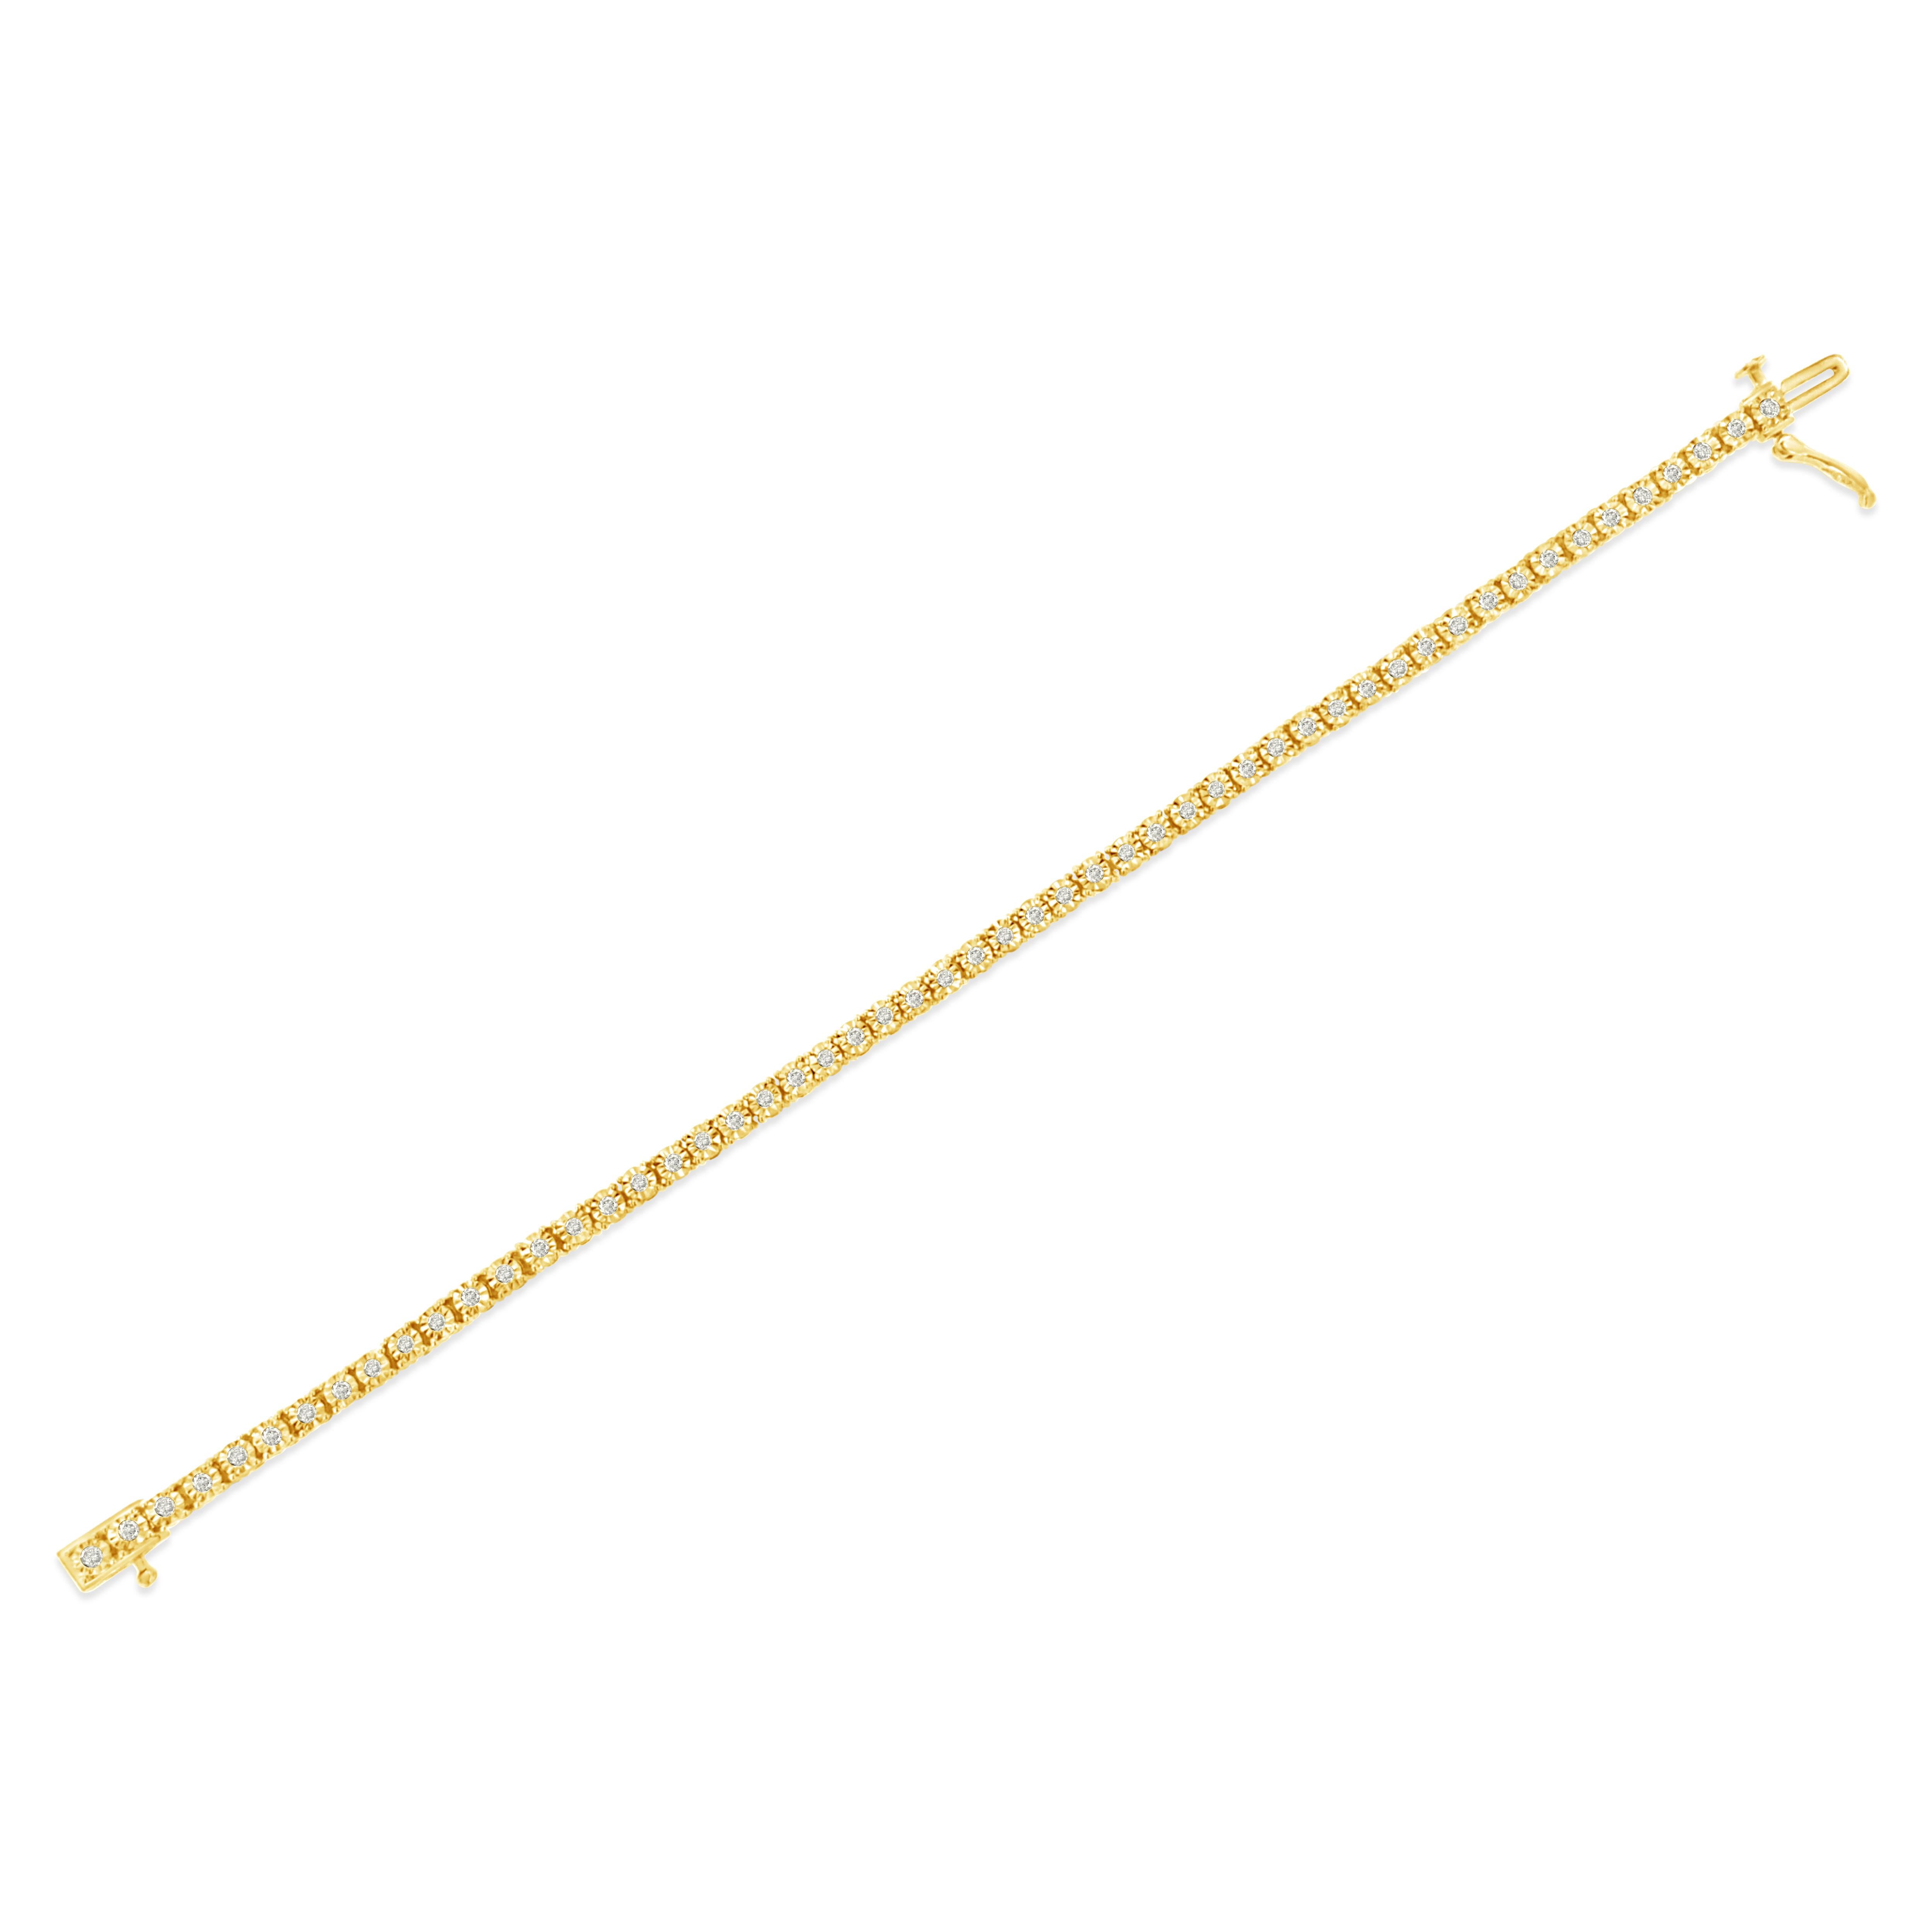 Round Cut Yellow Gold Over Sterling Silver 1.0 Carat Diamond Round Faceted Tennis Bracelet For Sale